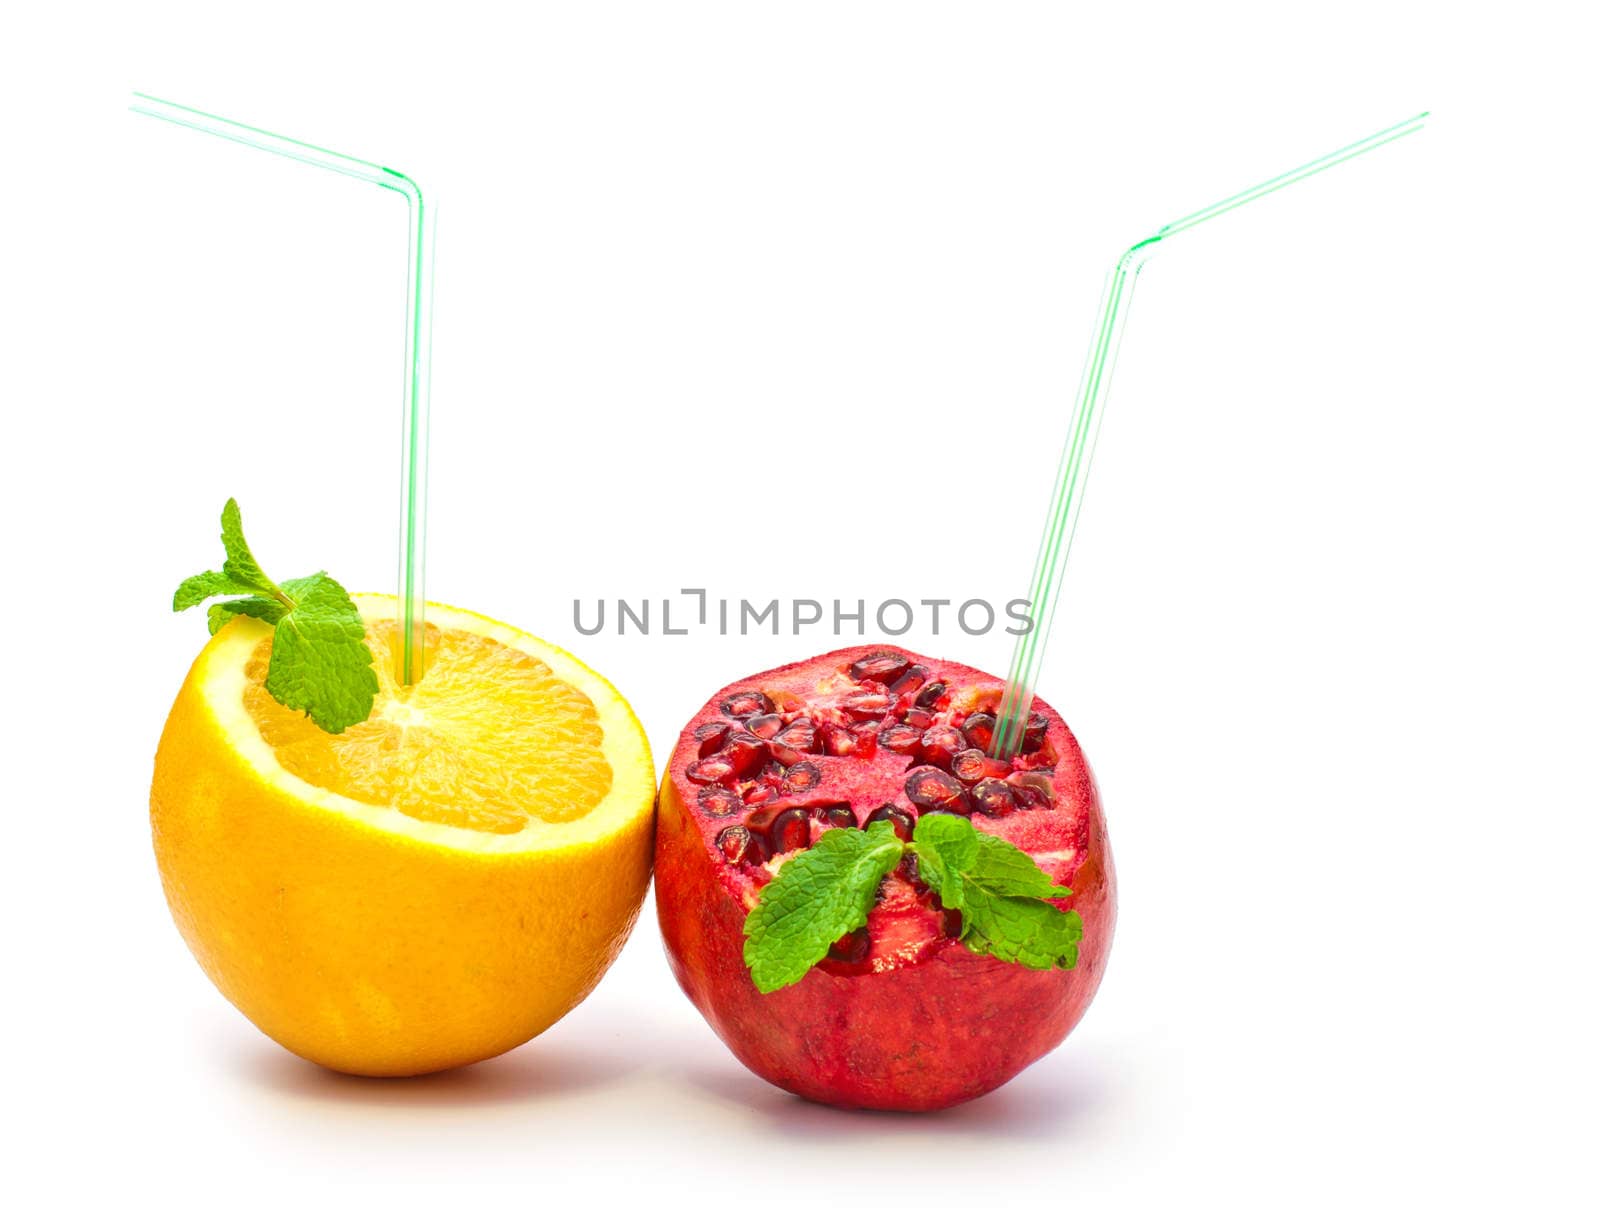 orange and pomegranate with a straw on a white background